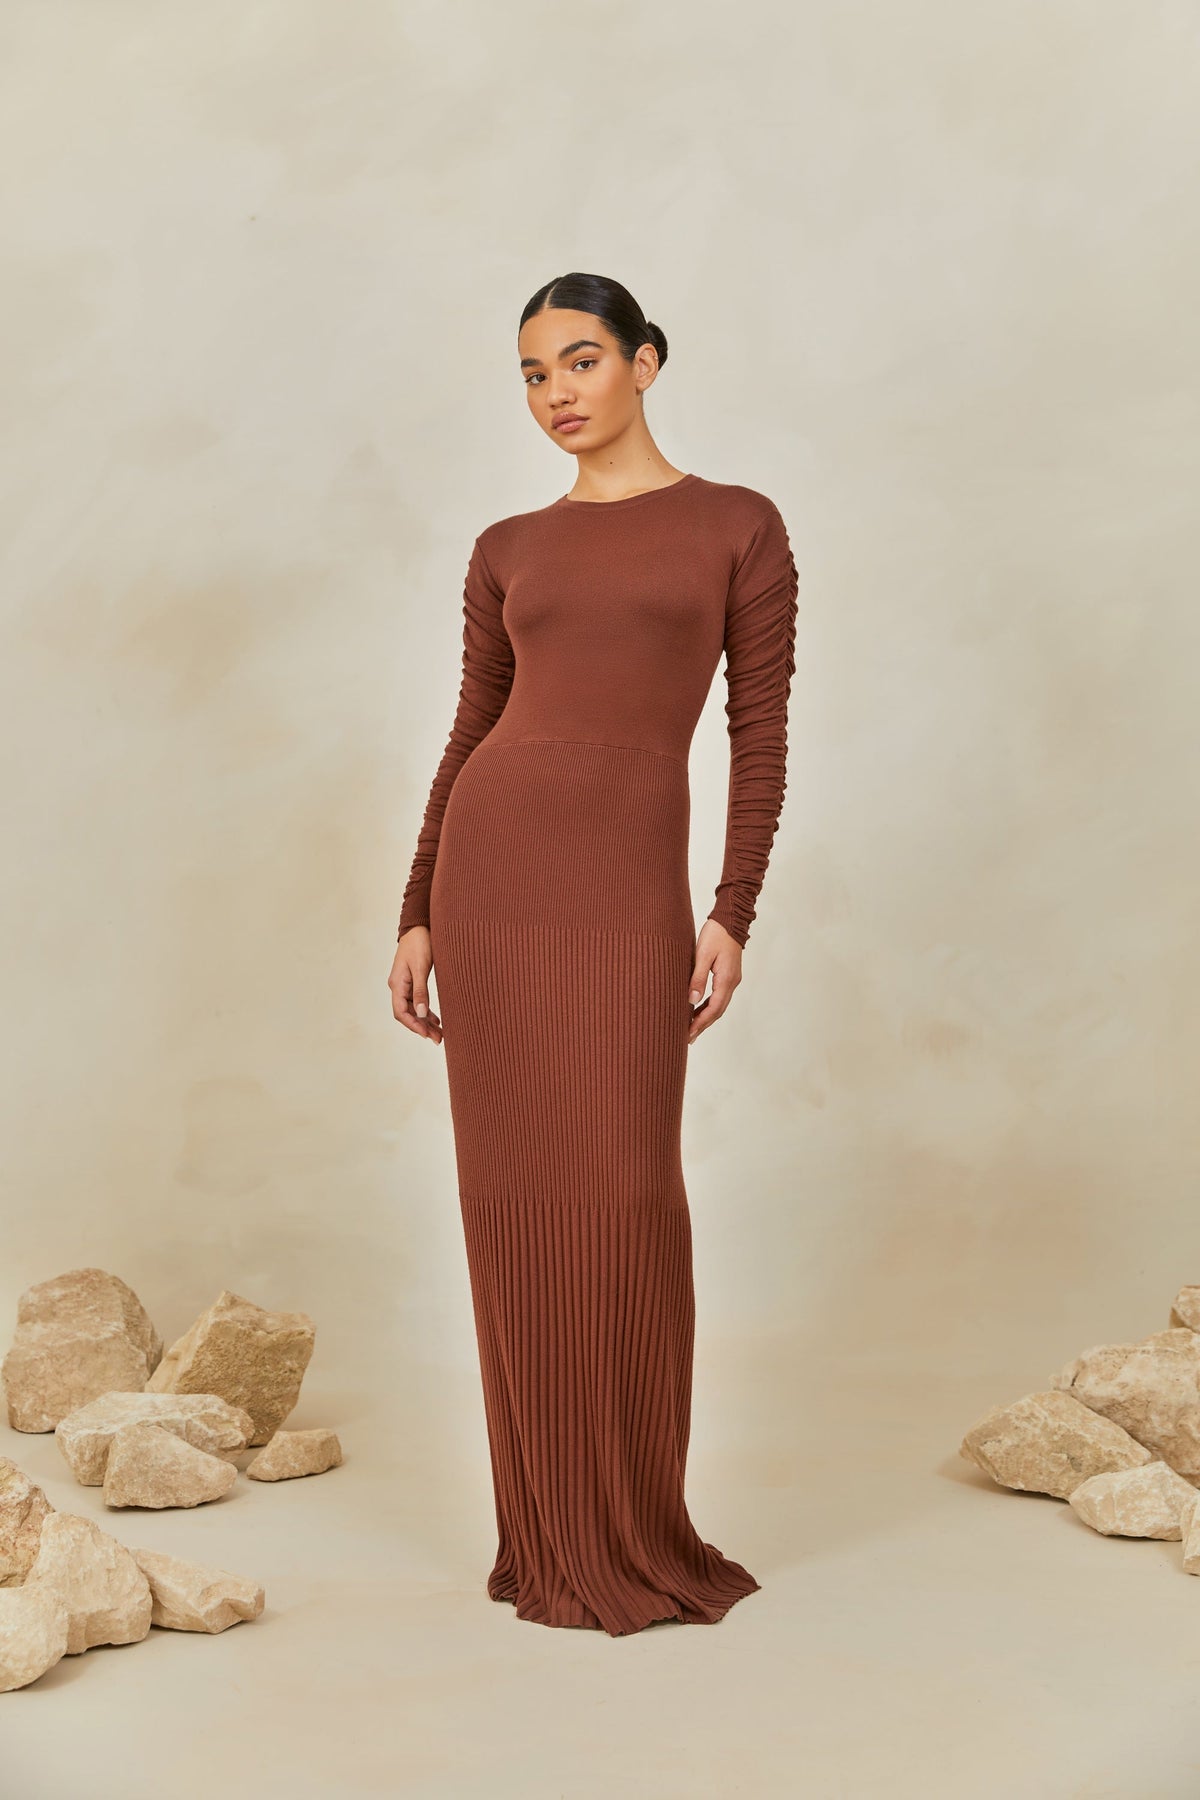 Rouched Sleeve Knit Maxi Dress - Chocolate Brown epschoolboard 